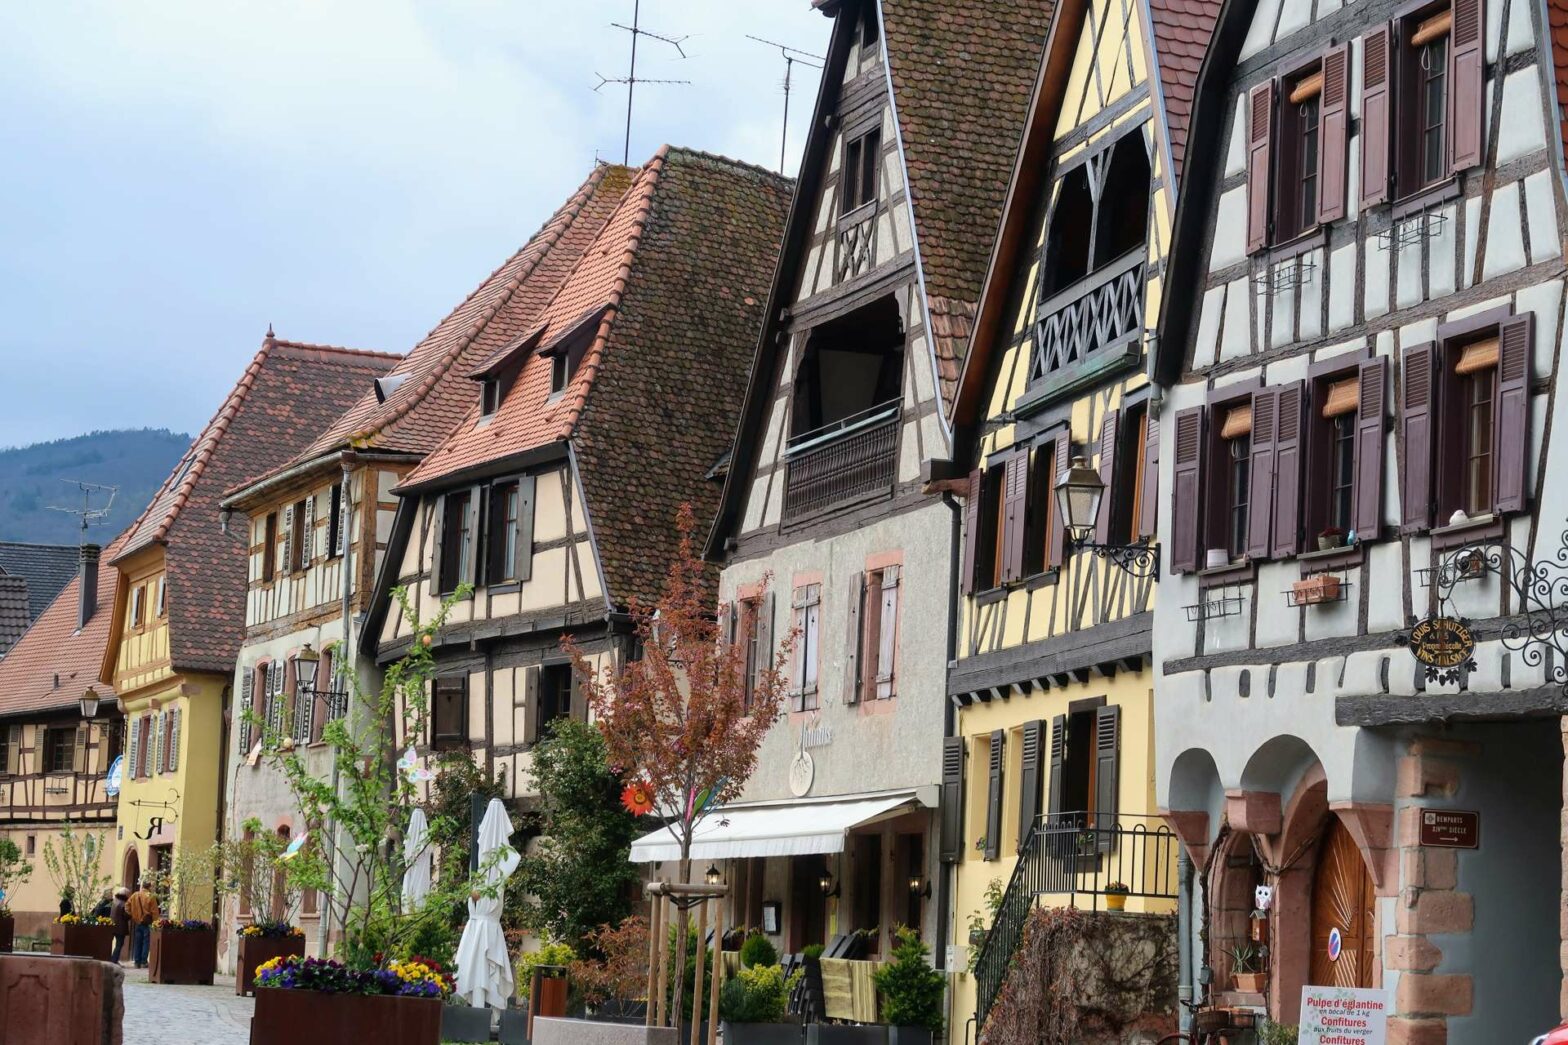 Bergheim, along the Alsace Wine Route